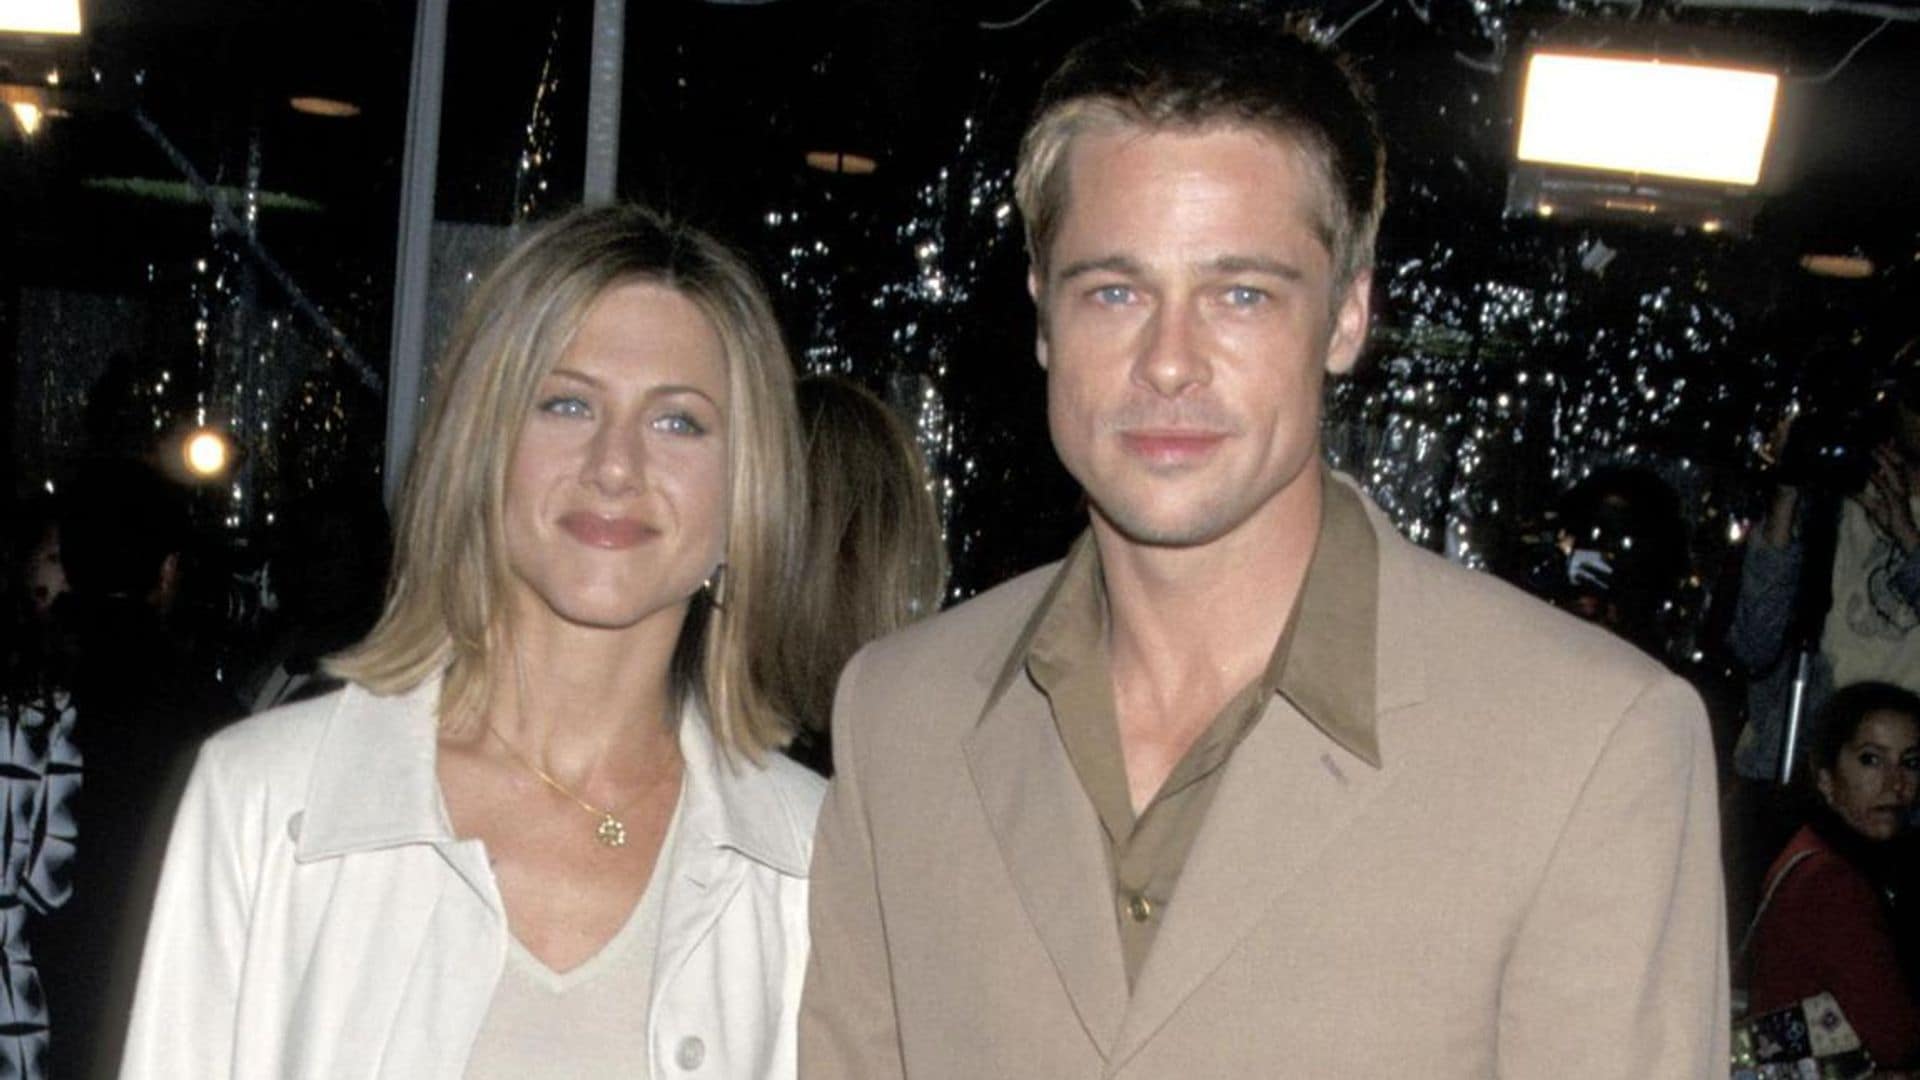 Brad Pitt and Jennifer Aniston’s top fashion moments of the ‘90s and early ‘00s